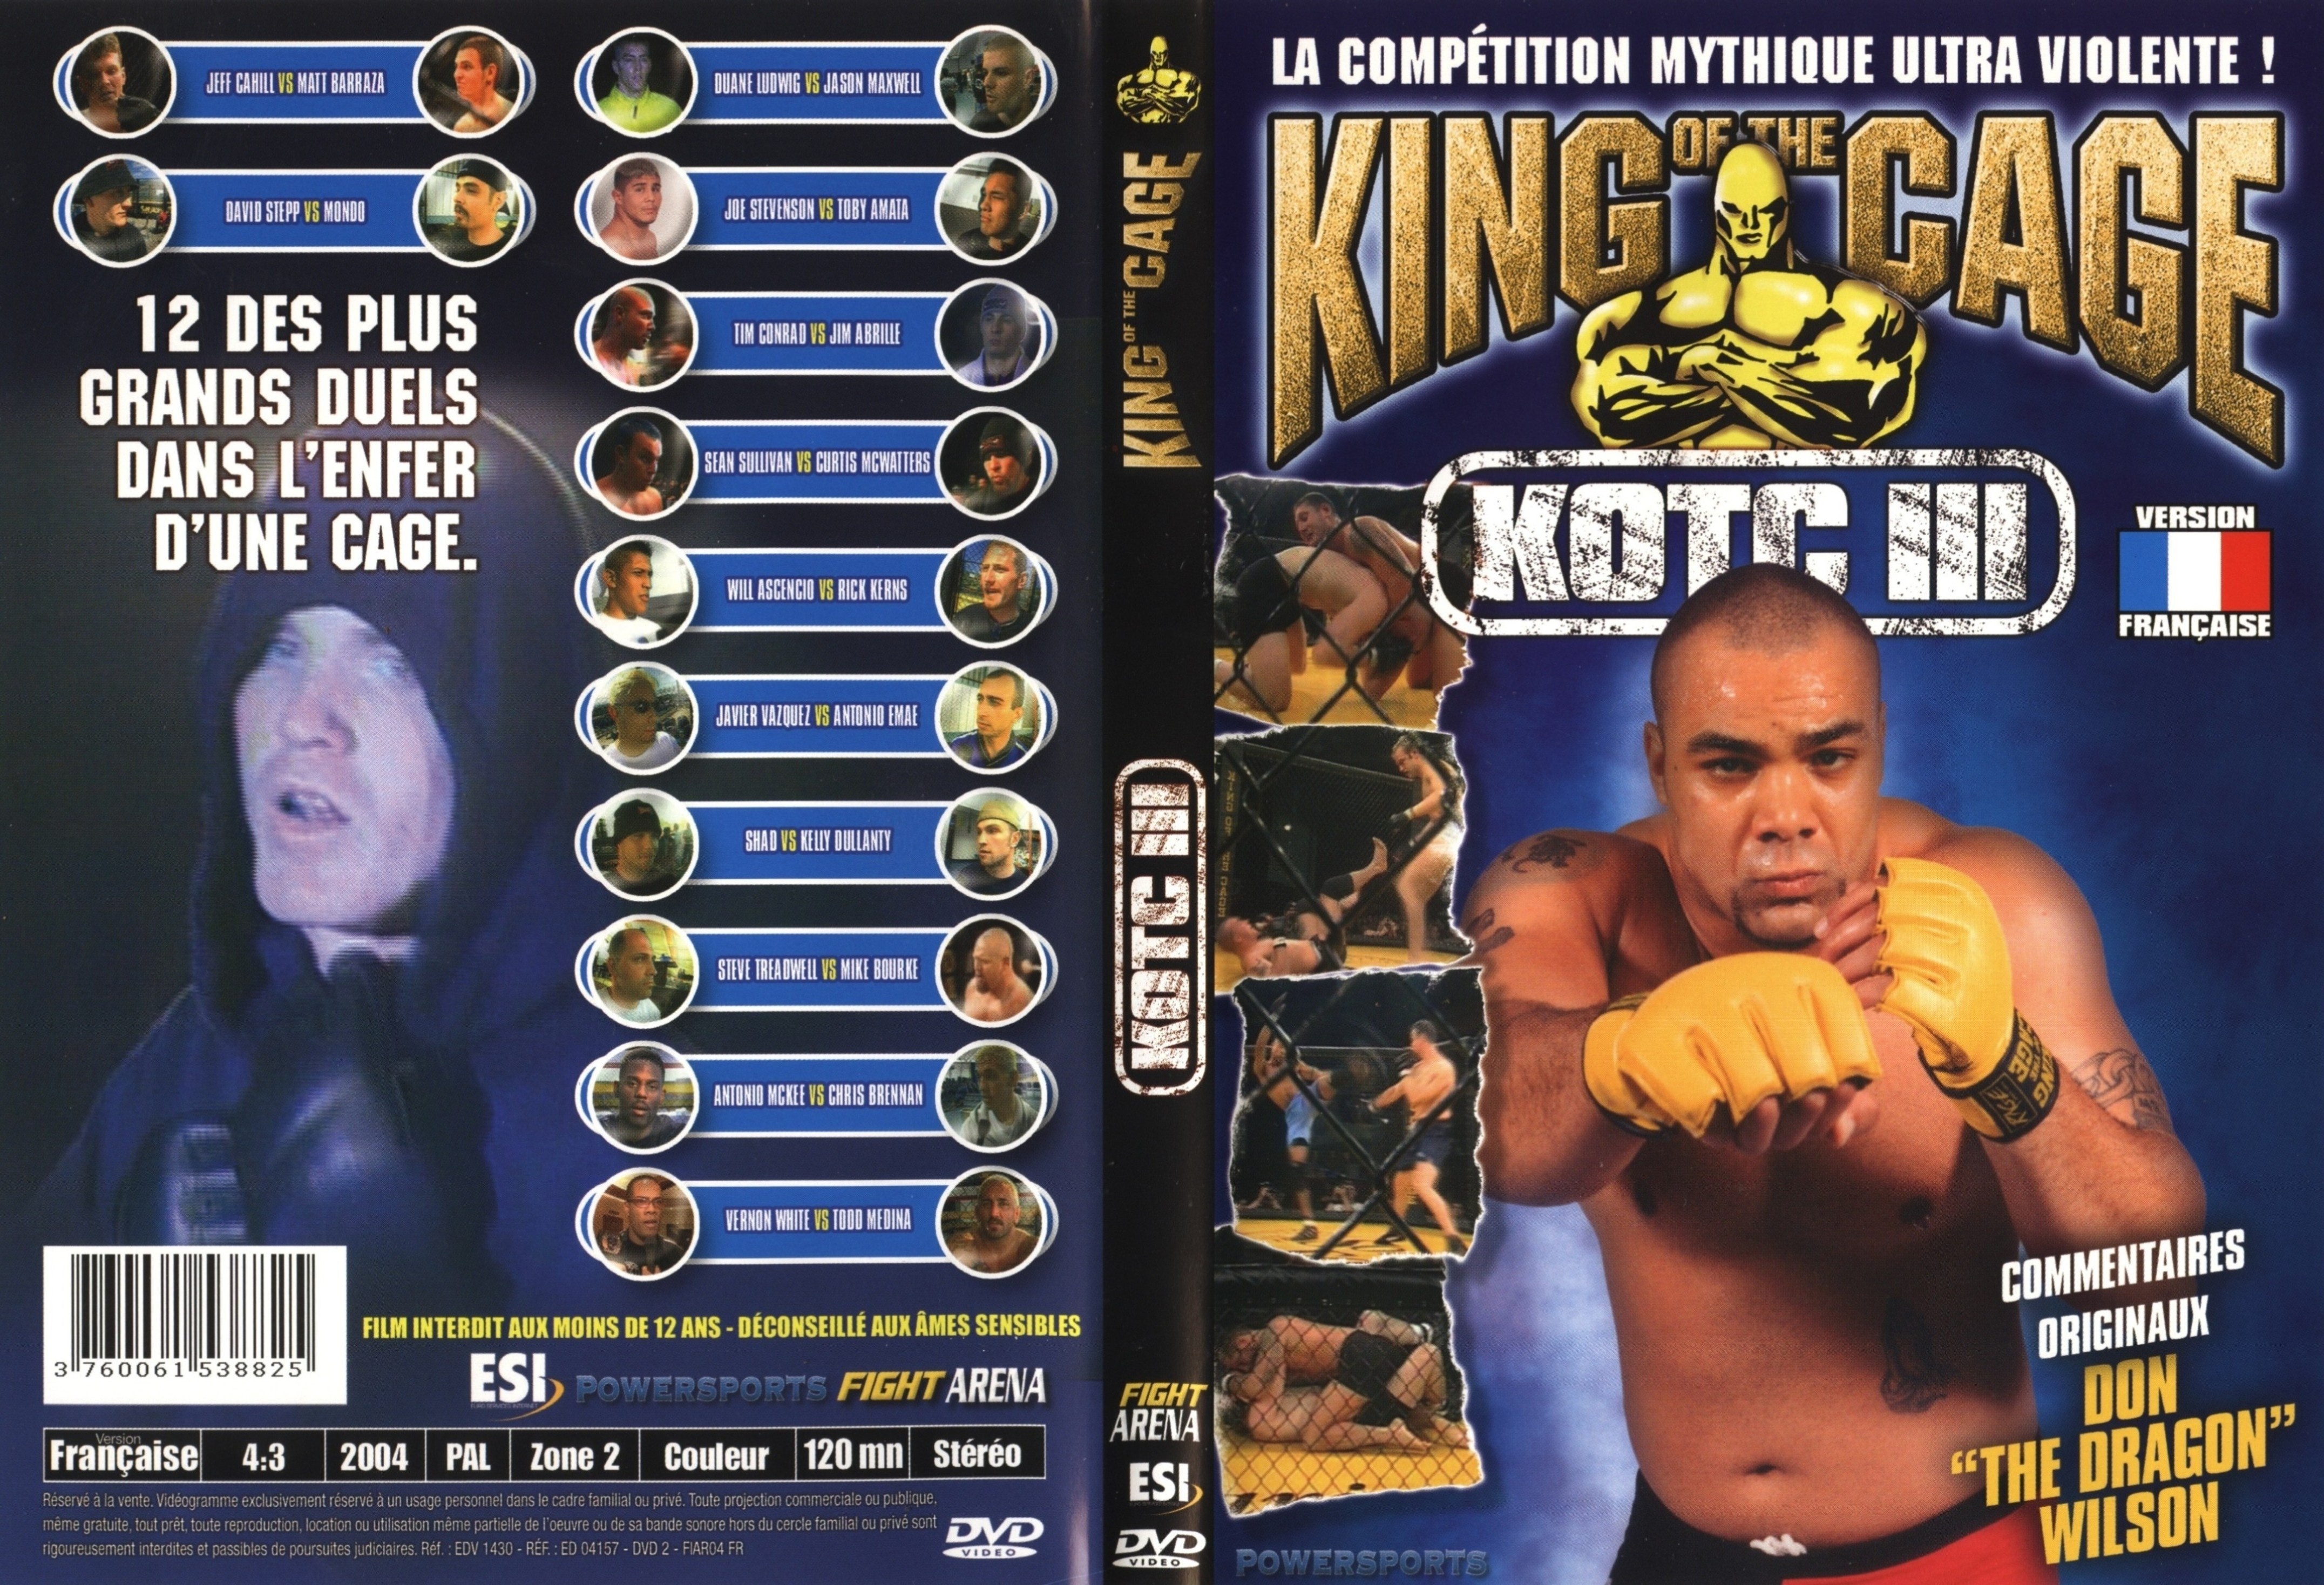 Jaquette DVD King of the cage kotc 3